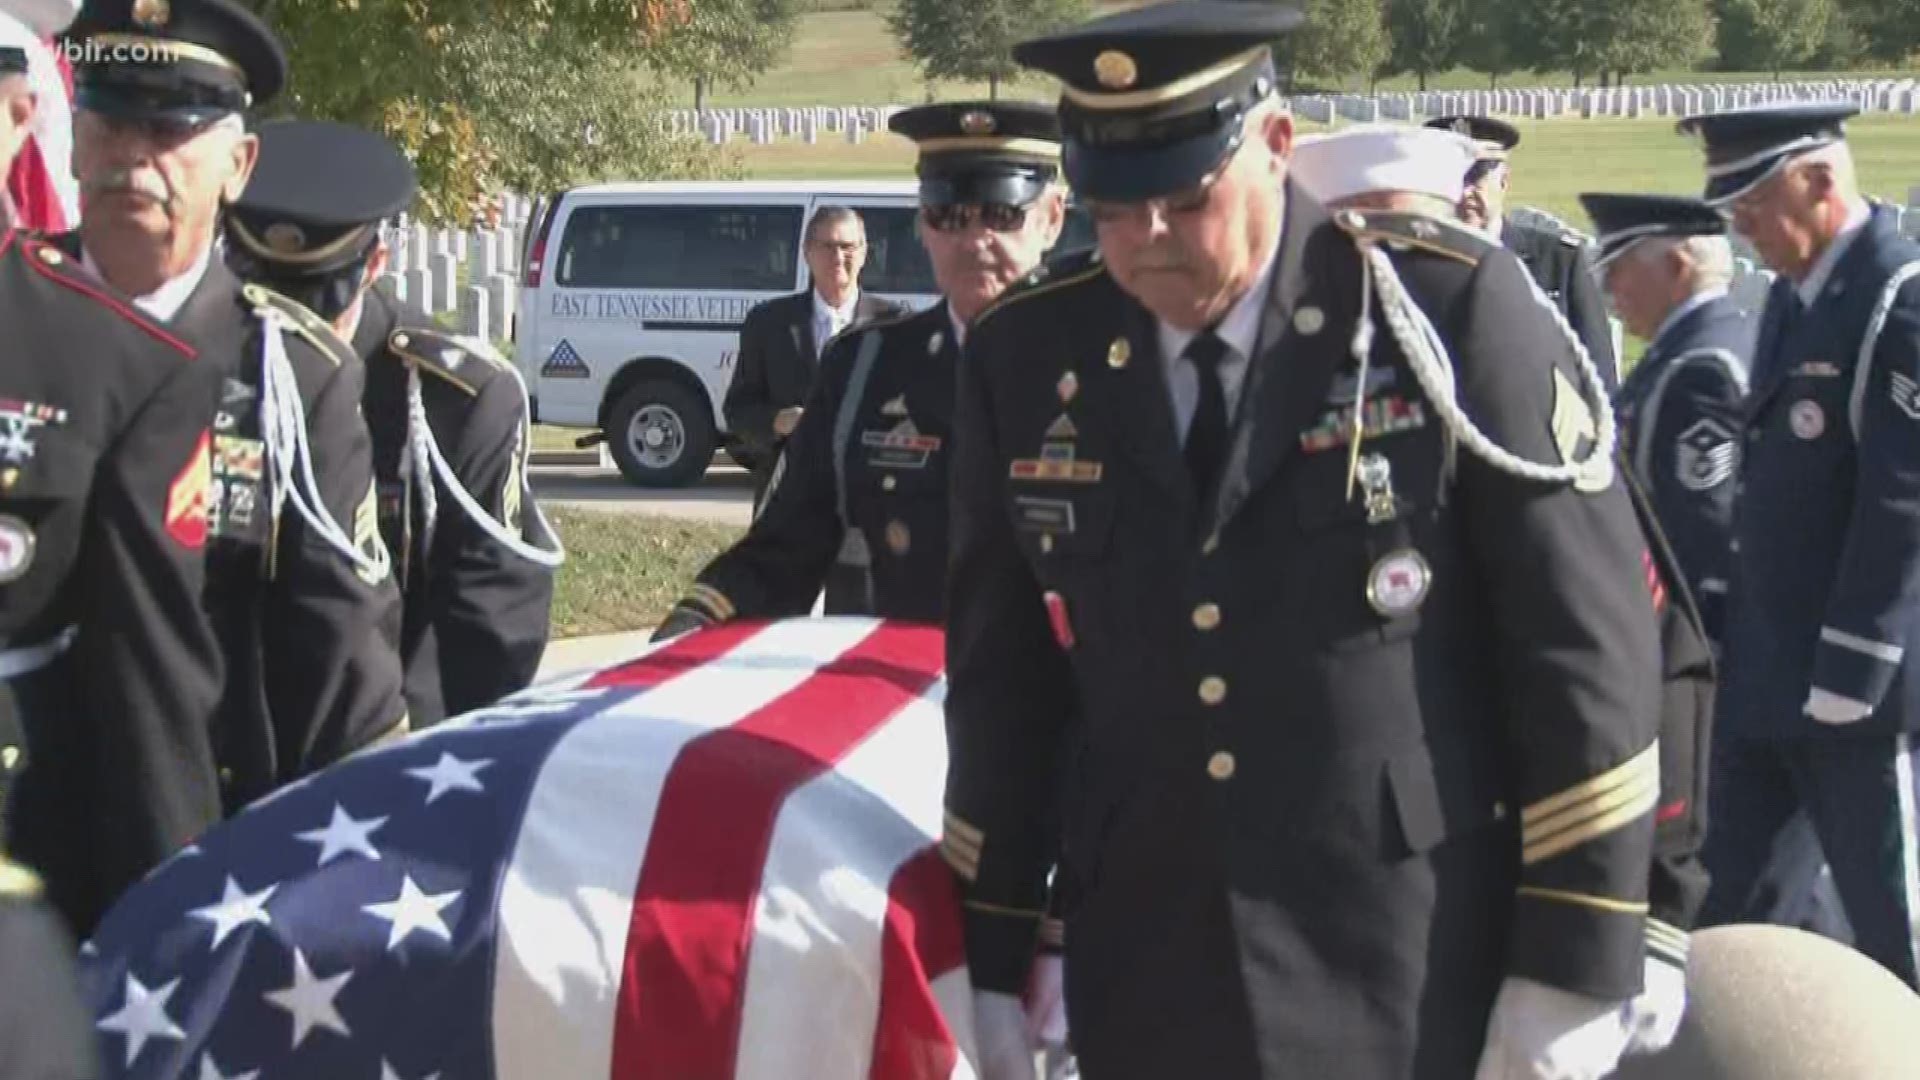 Dozens of people came together to say goodbye to a veteran with no family to claim him.